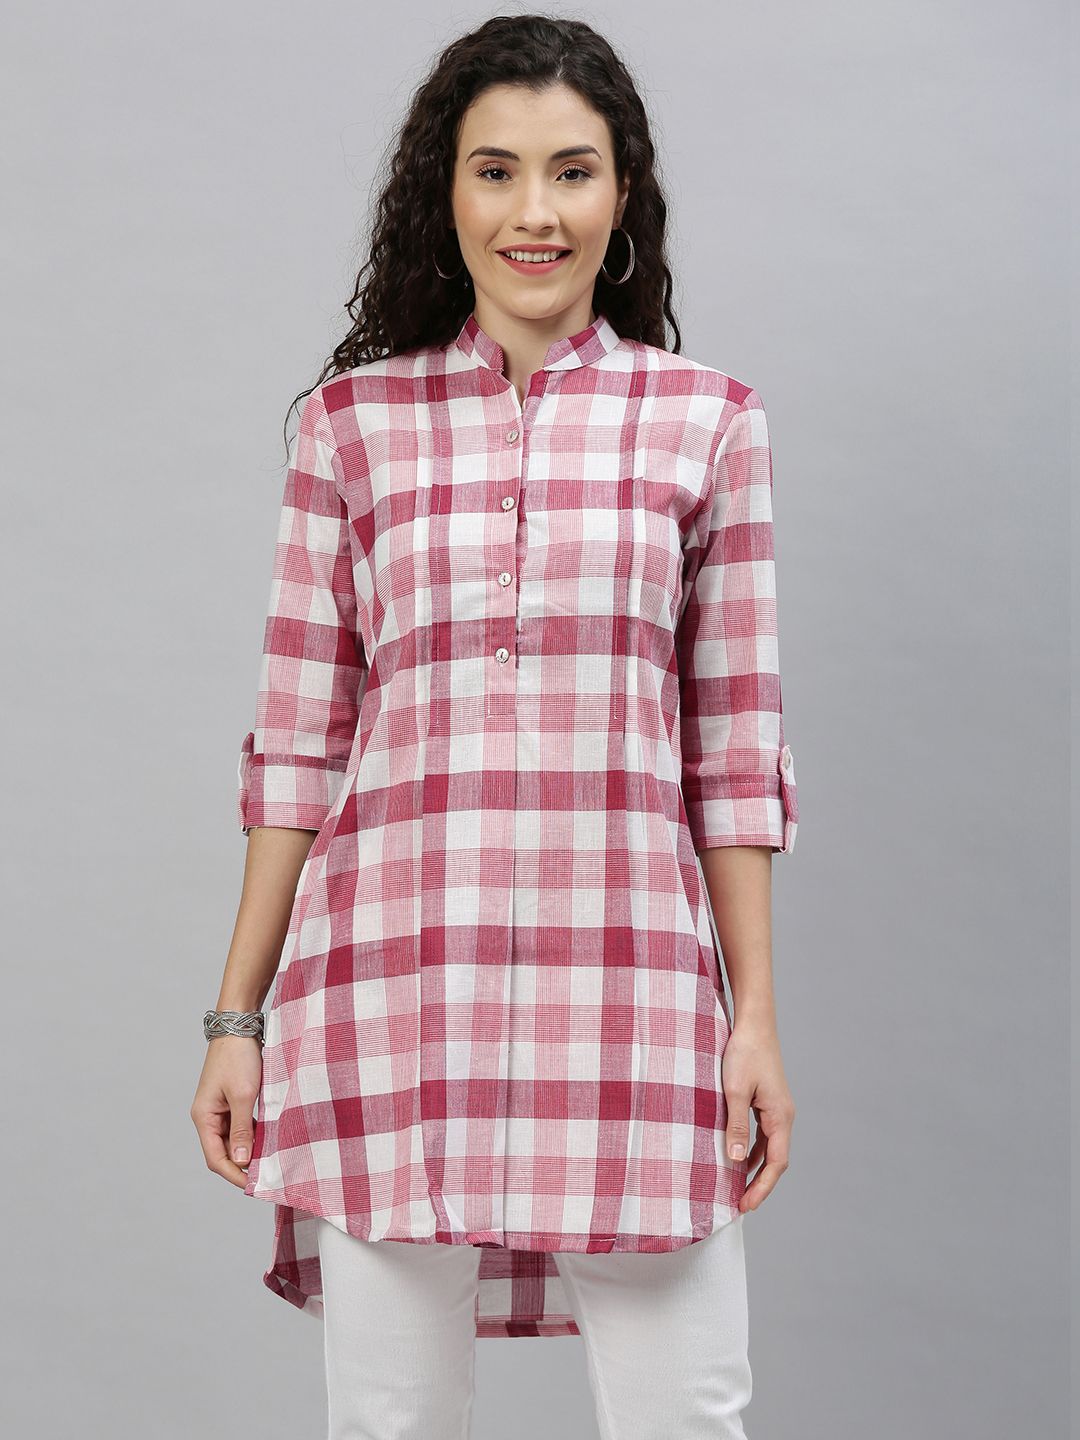 ETIQUETTE Women's Red & White Checked Tunic Price in India